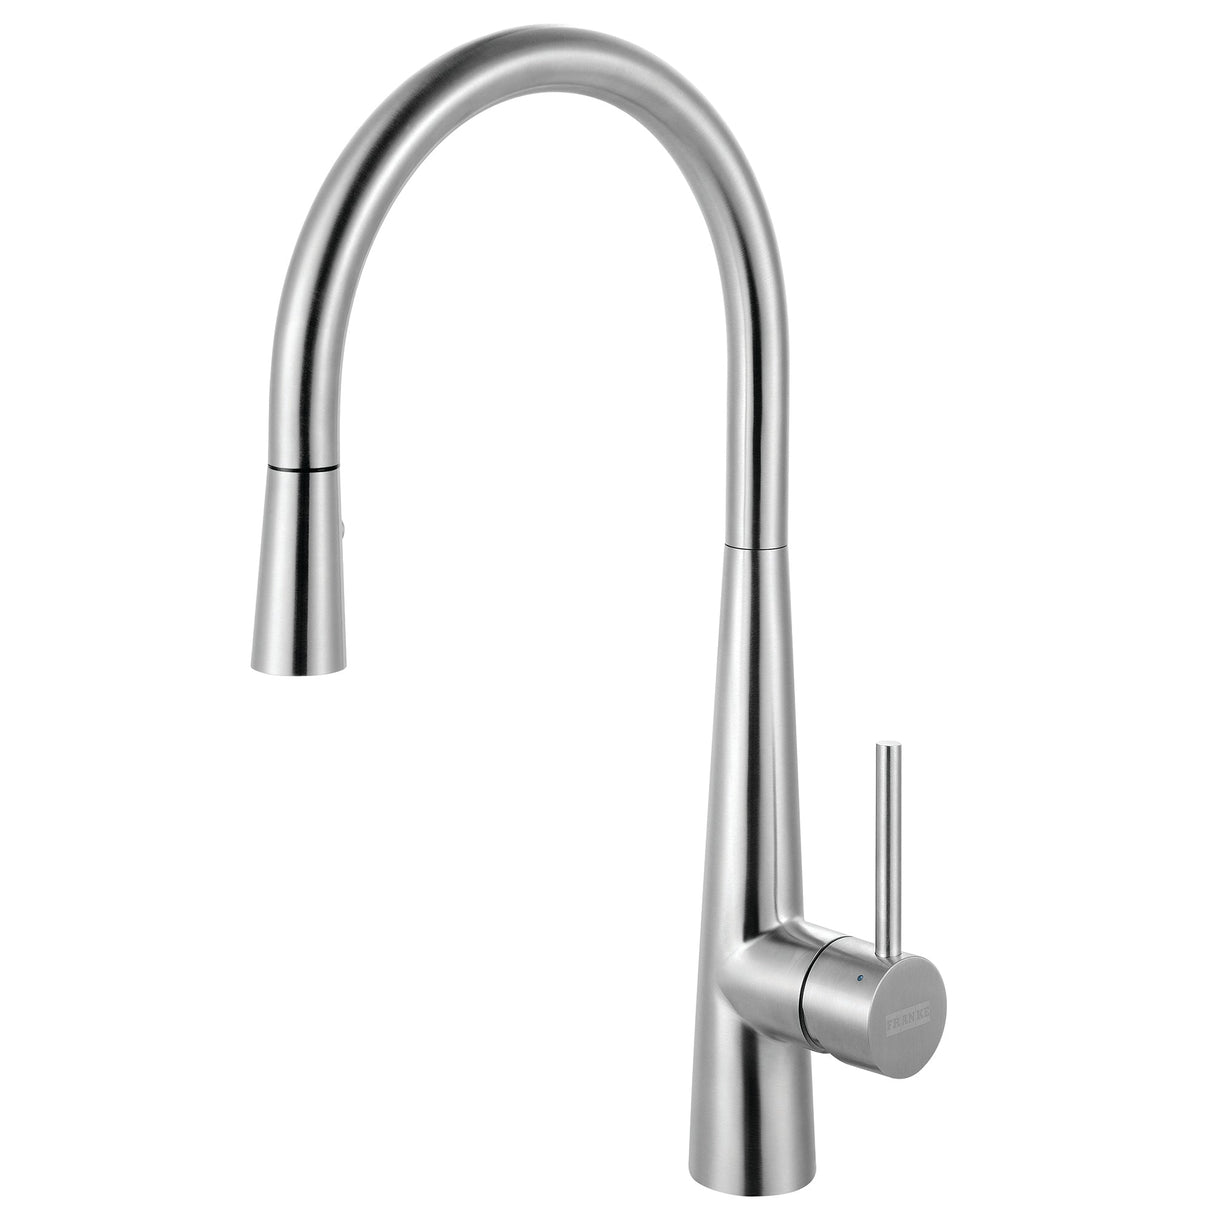 FRANKE STL-PD-304 Steel 17.5-inch Single Handle Pull-Down Kitchen Faucet in Stainless Steel In Stainless Steel